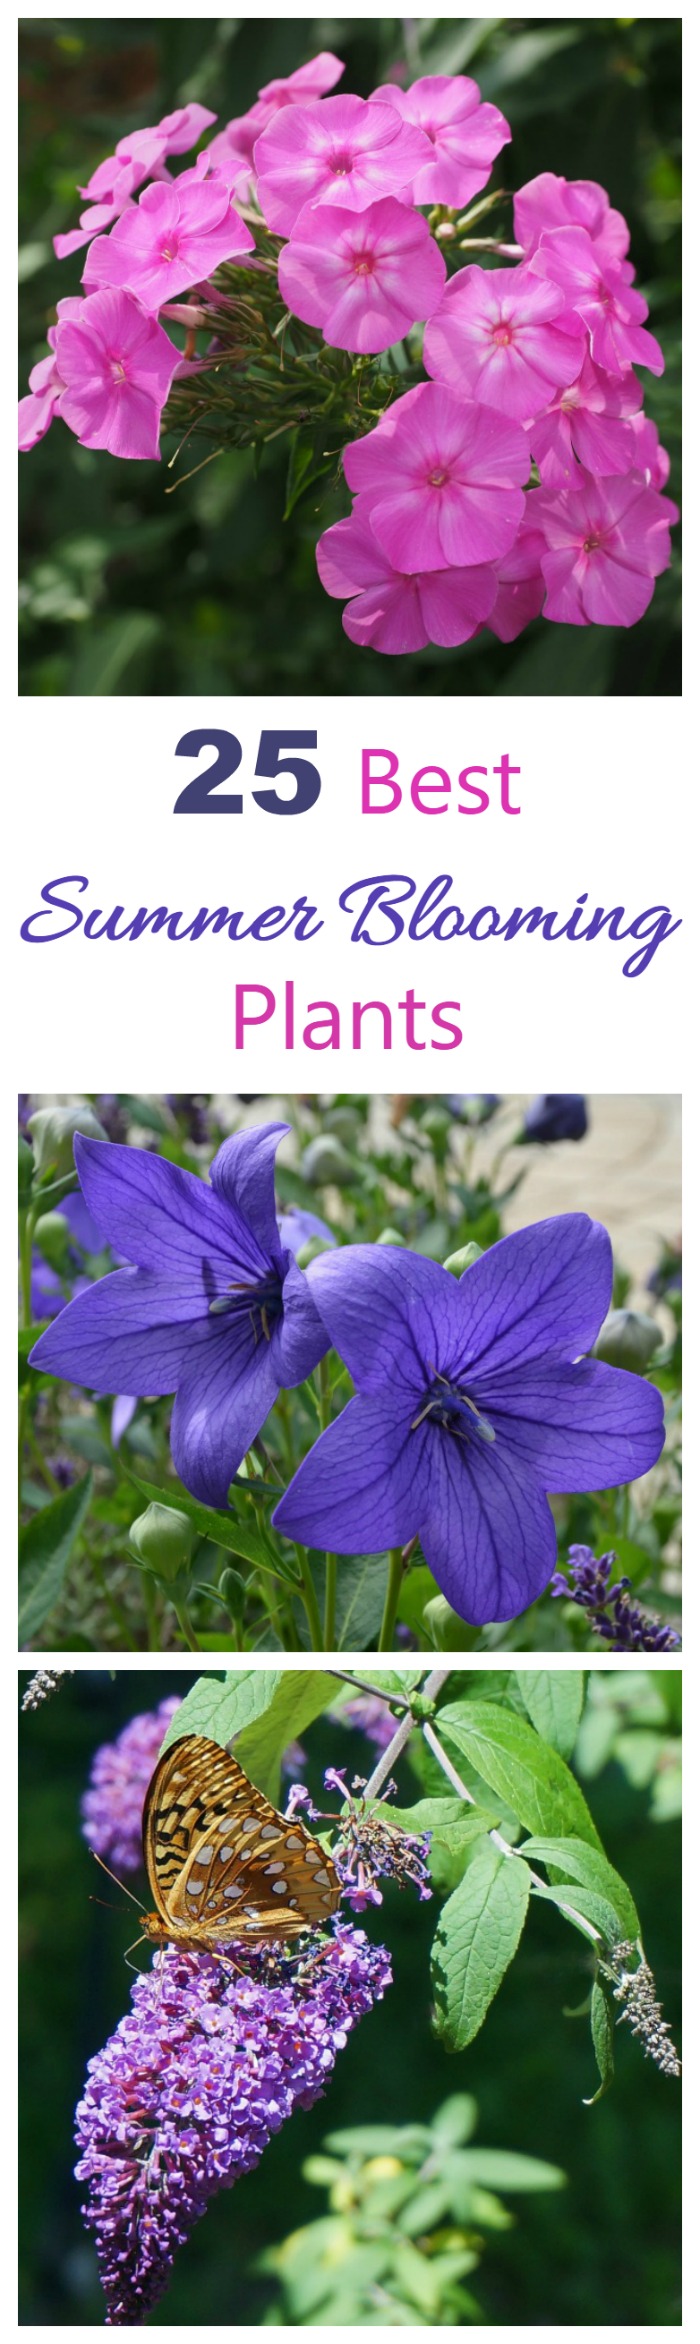 These summer blooming plants will give you dramatic color all summer long , and in many cases, right into the fall. Grow a few of these to make your yard the talk of the neighborhood.